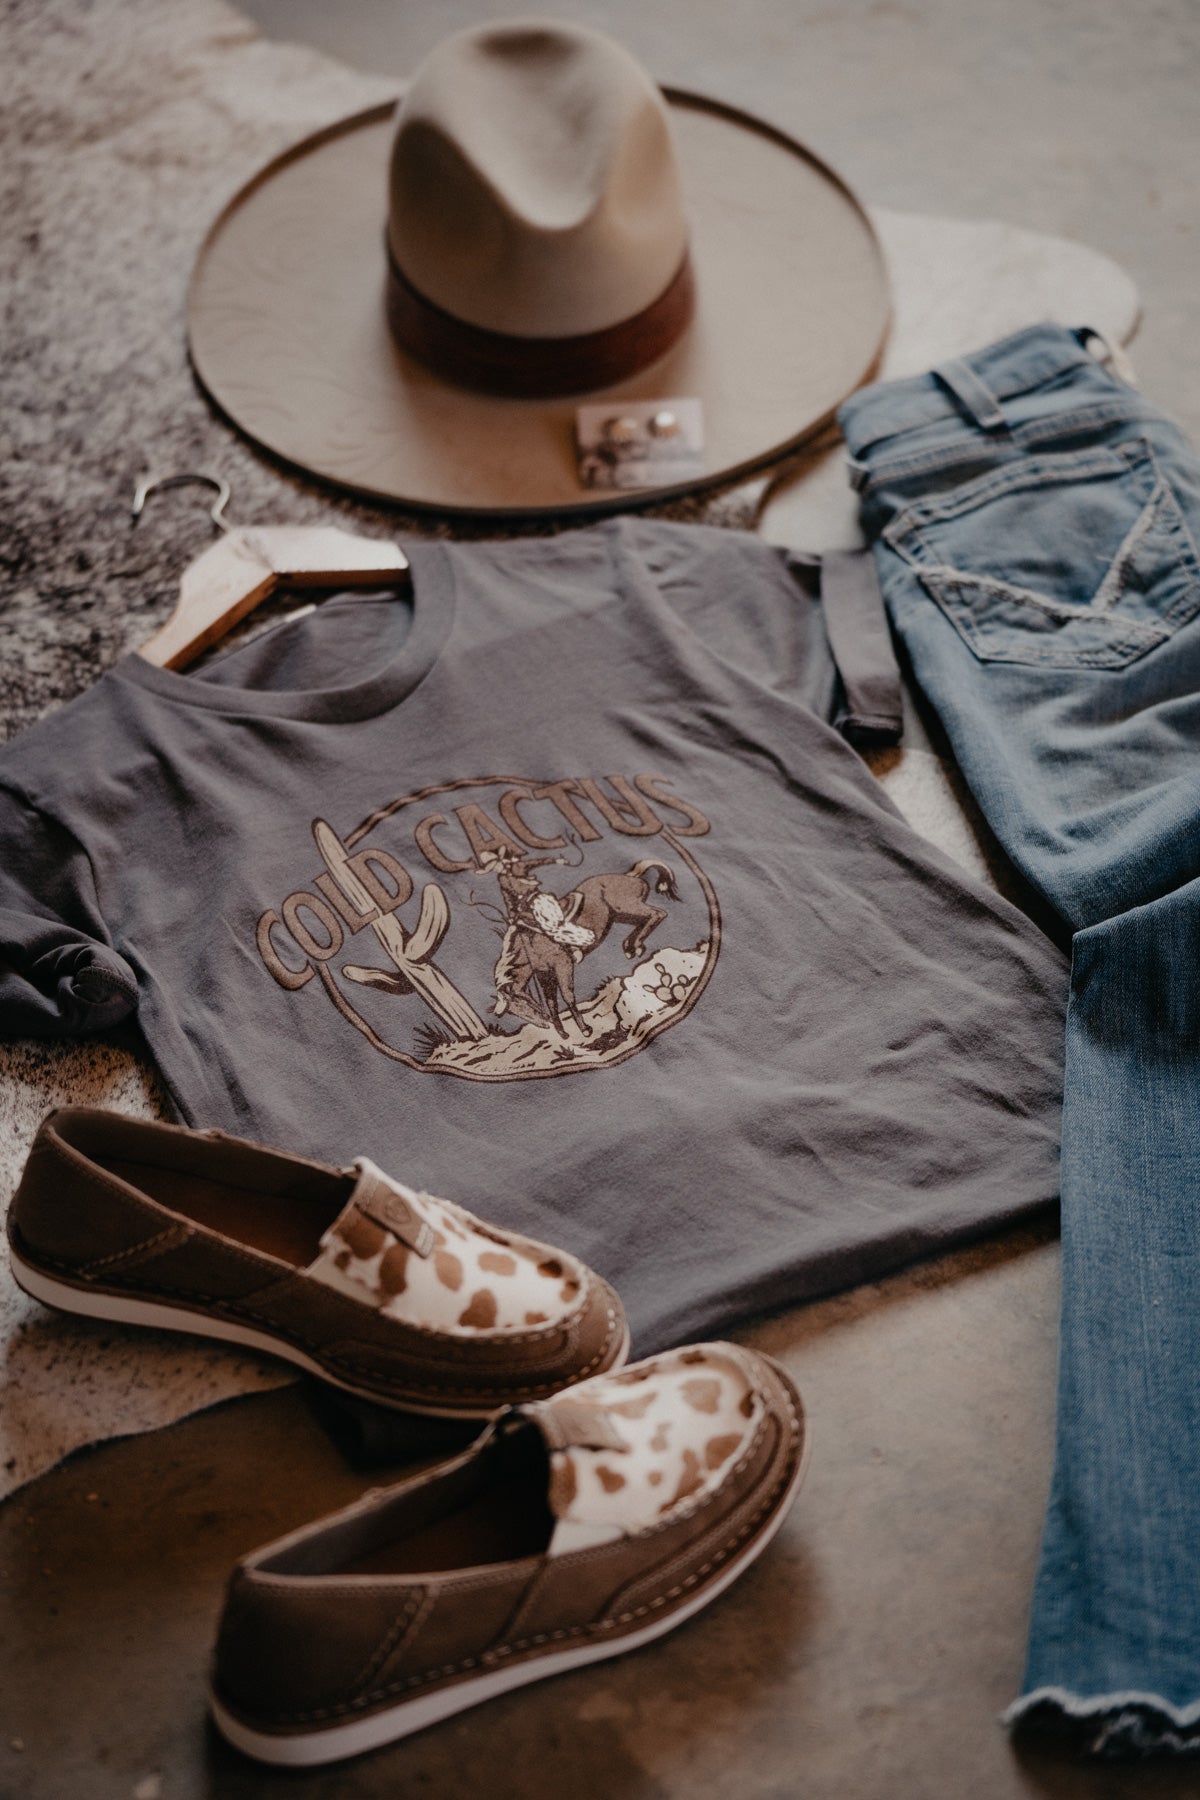 "Wild n' Wooly" CC Cowgirl Exclusive Graphic T